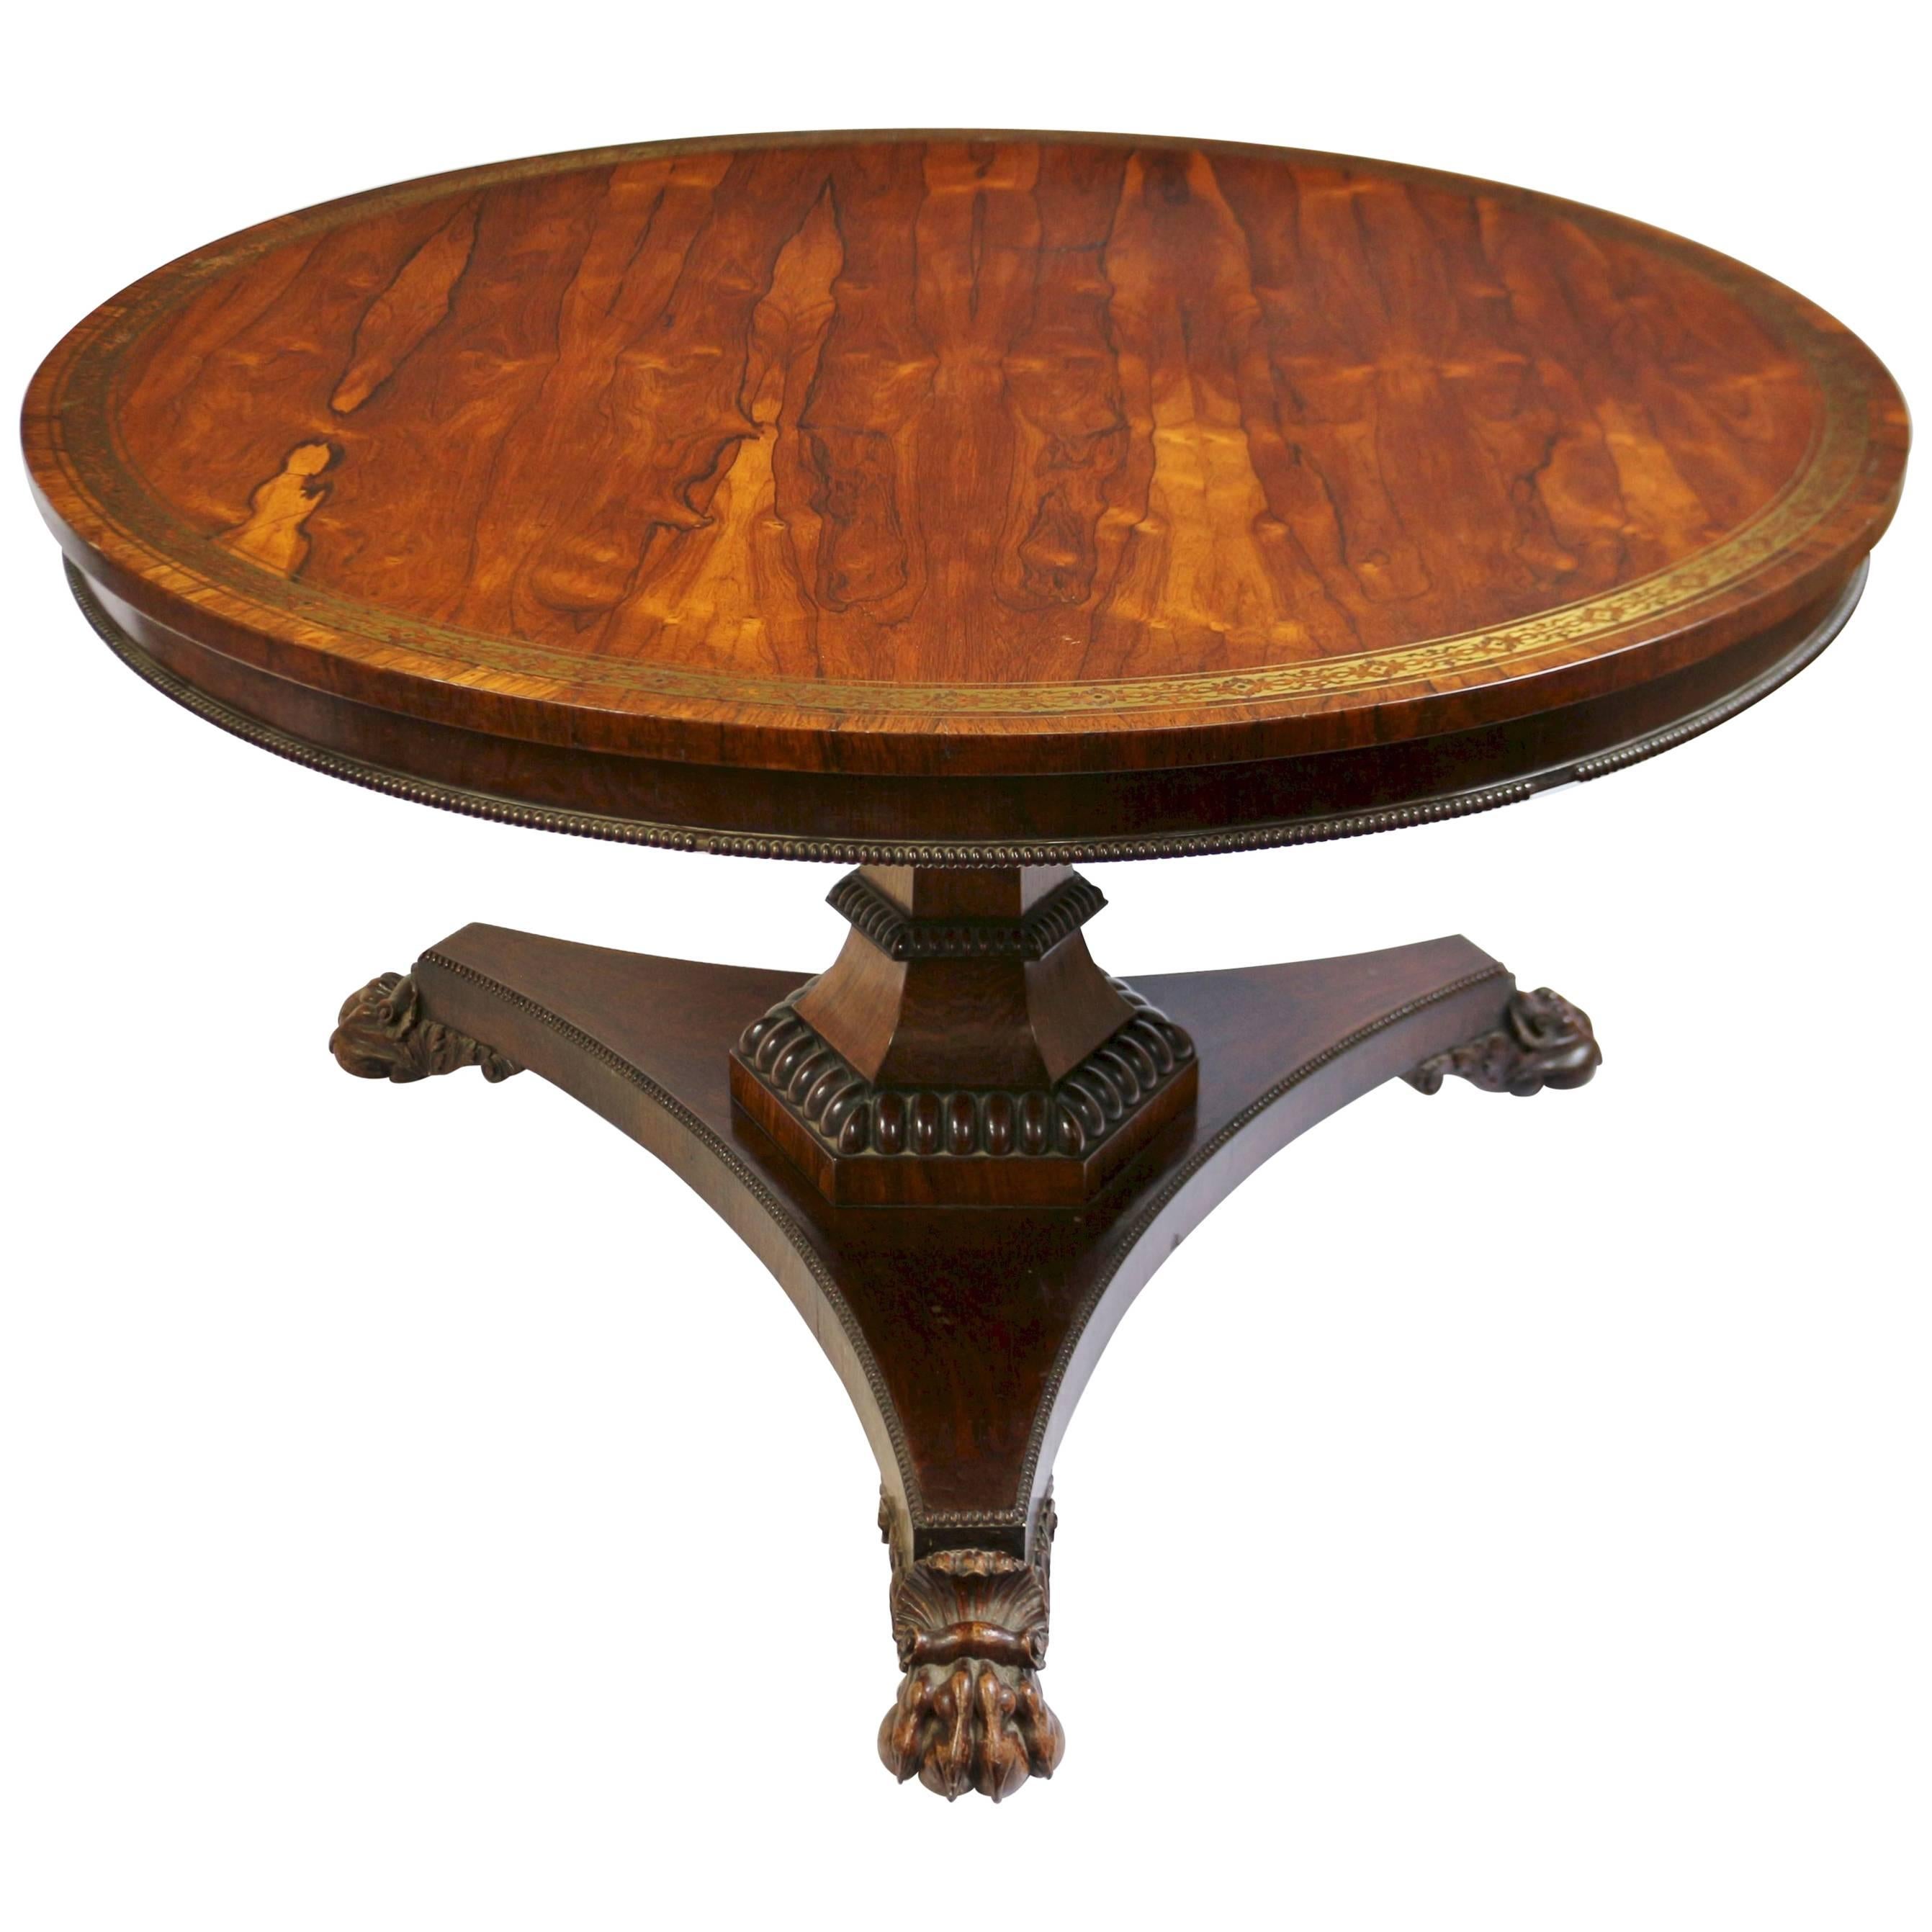 Fine and Classic Regency Rosewood Pedestal Table